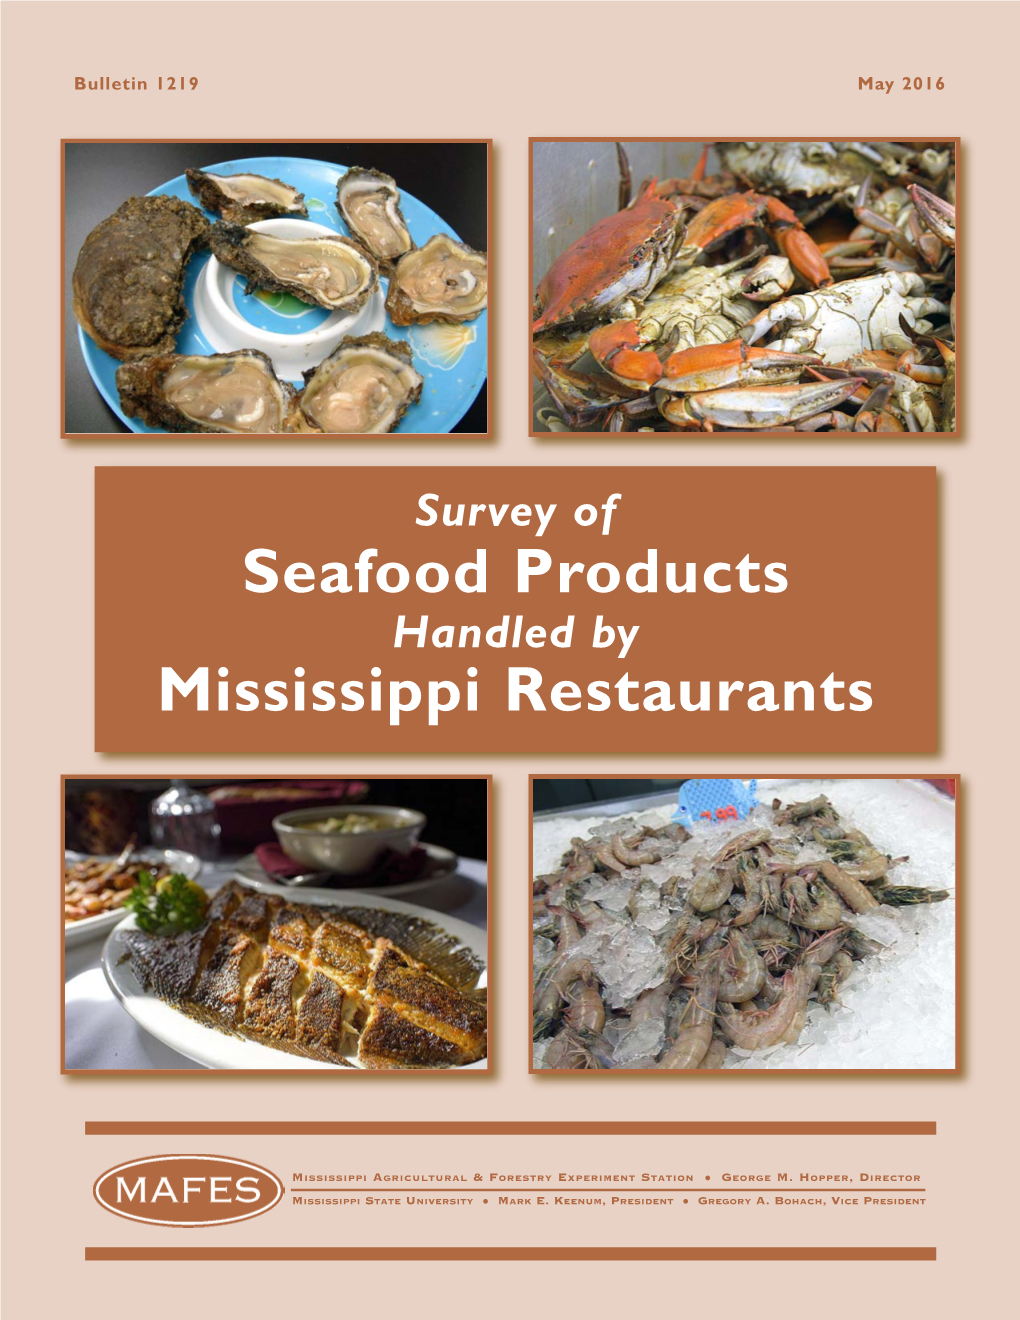 Survey of Seafood Products Handled by Mississippi Restaurants